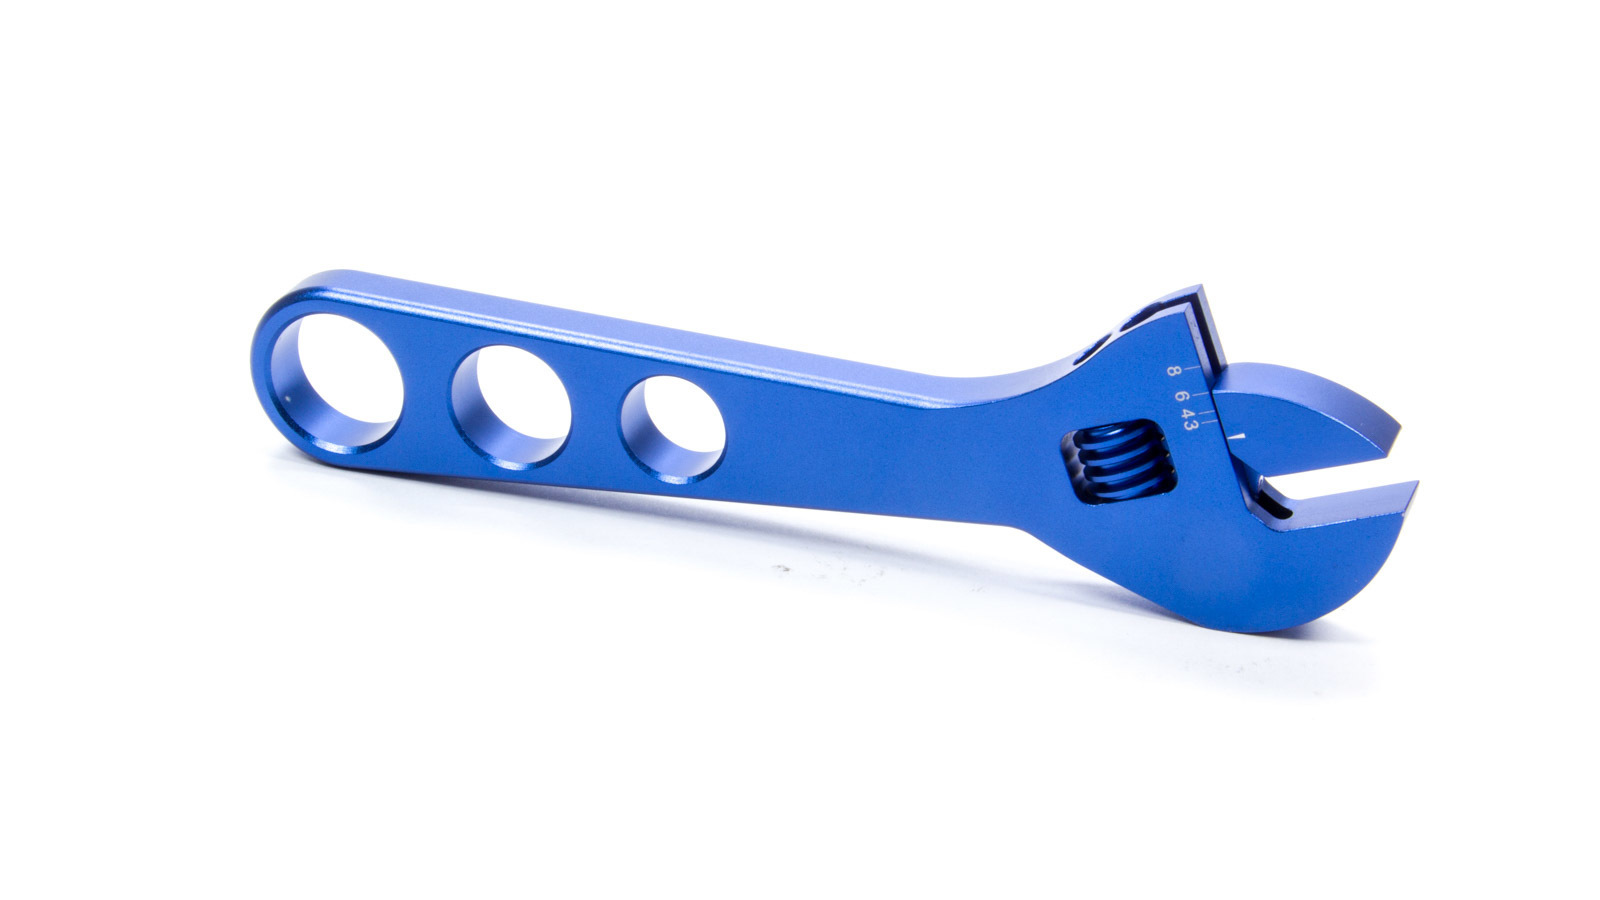 Proform 67727 Adjustable AN Wrench, Single End, 3 AN to 8 AN, Billet Aluminum, Blue Anodized, Each